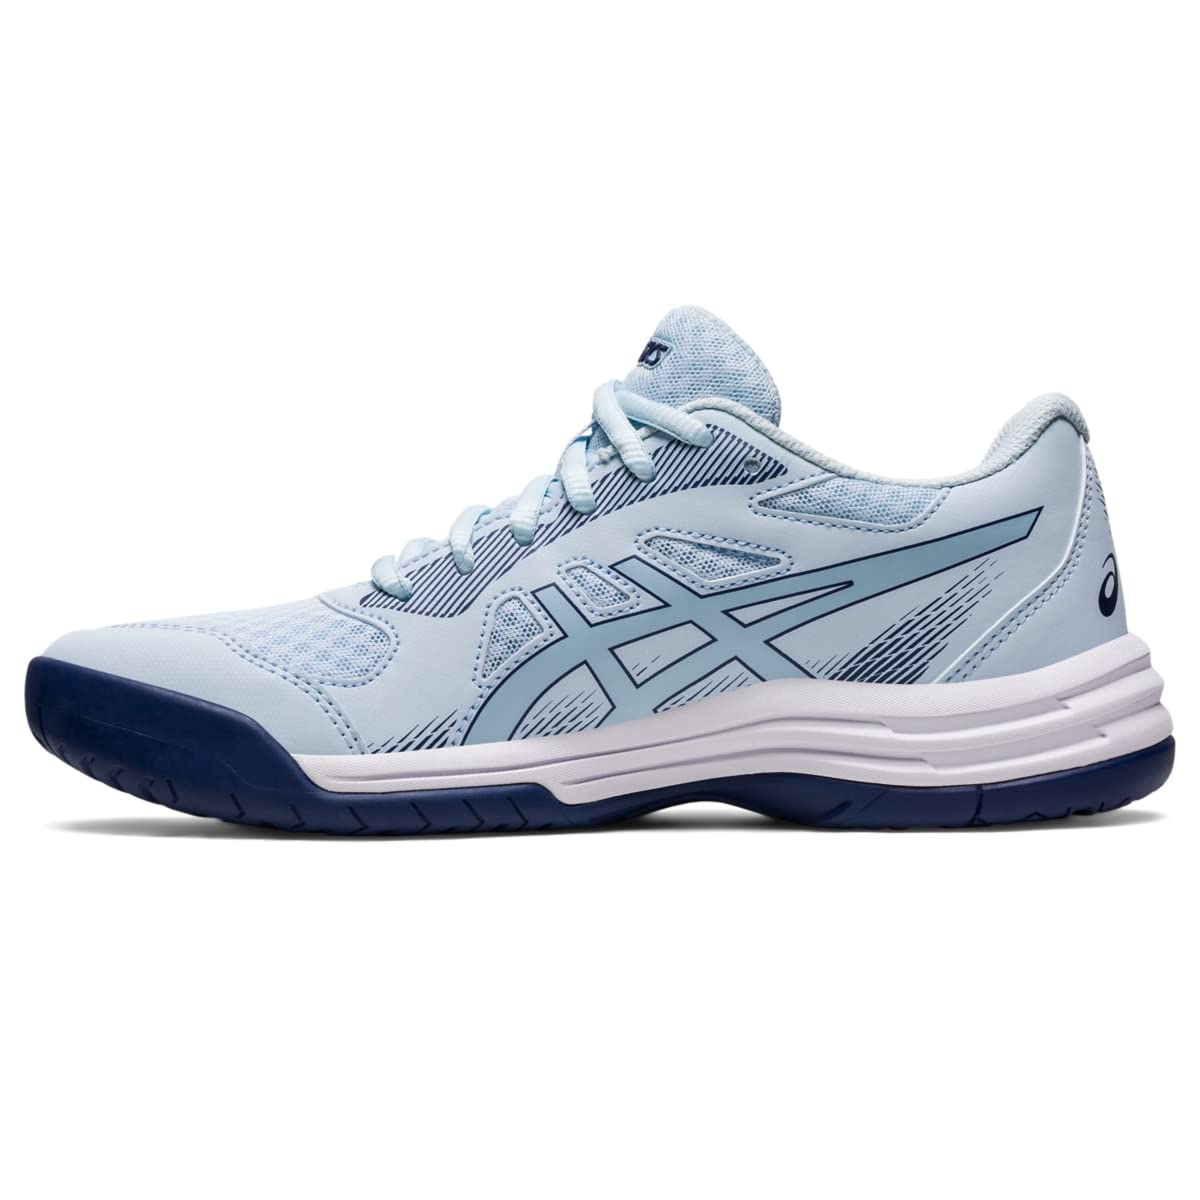 7 Best Women's Pickleball Shoes for Narrow Feet (Reviews & Buying Guide ...